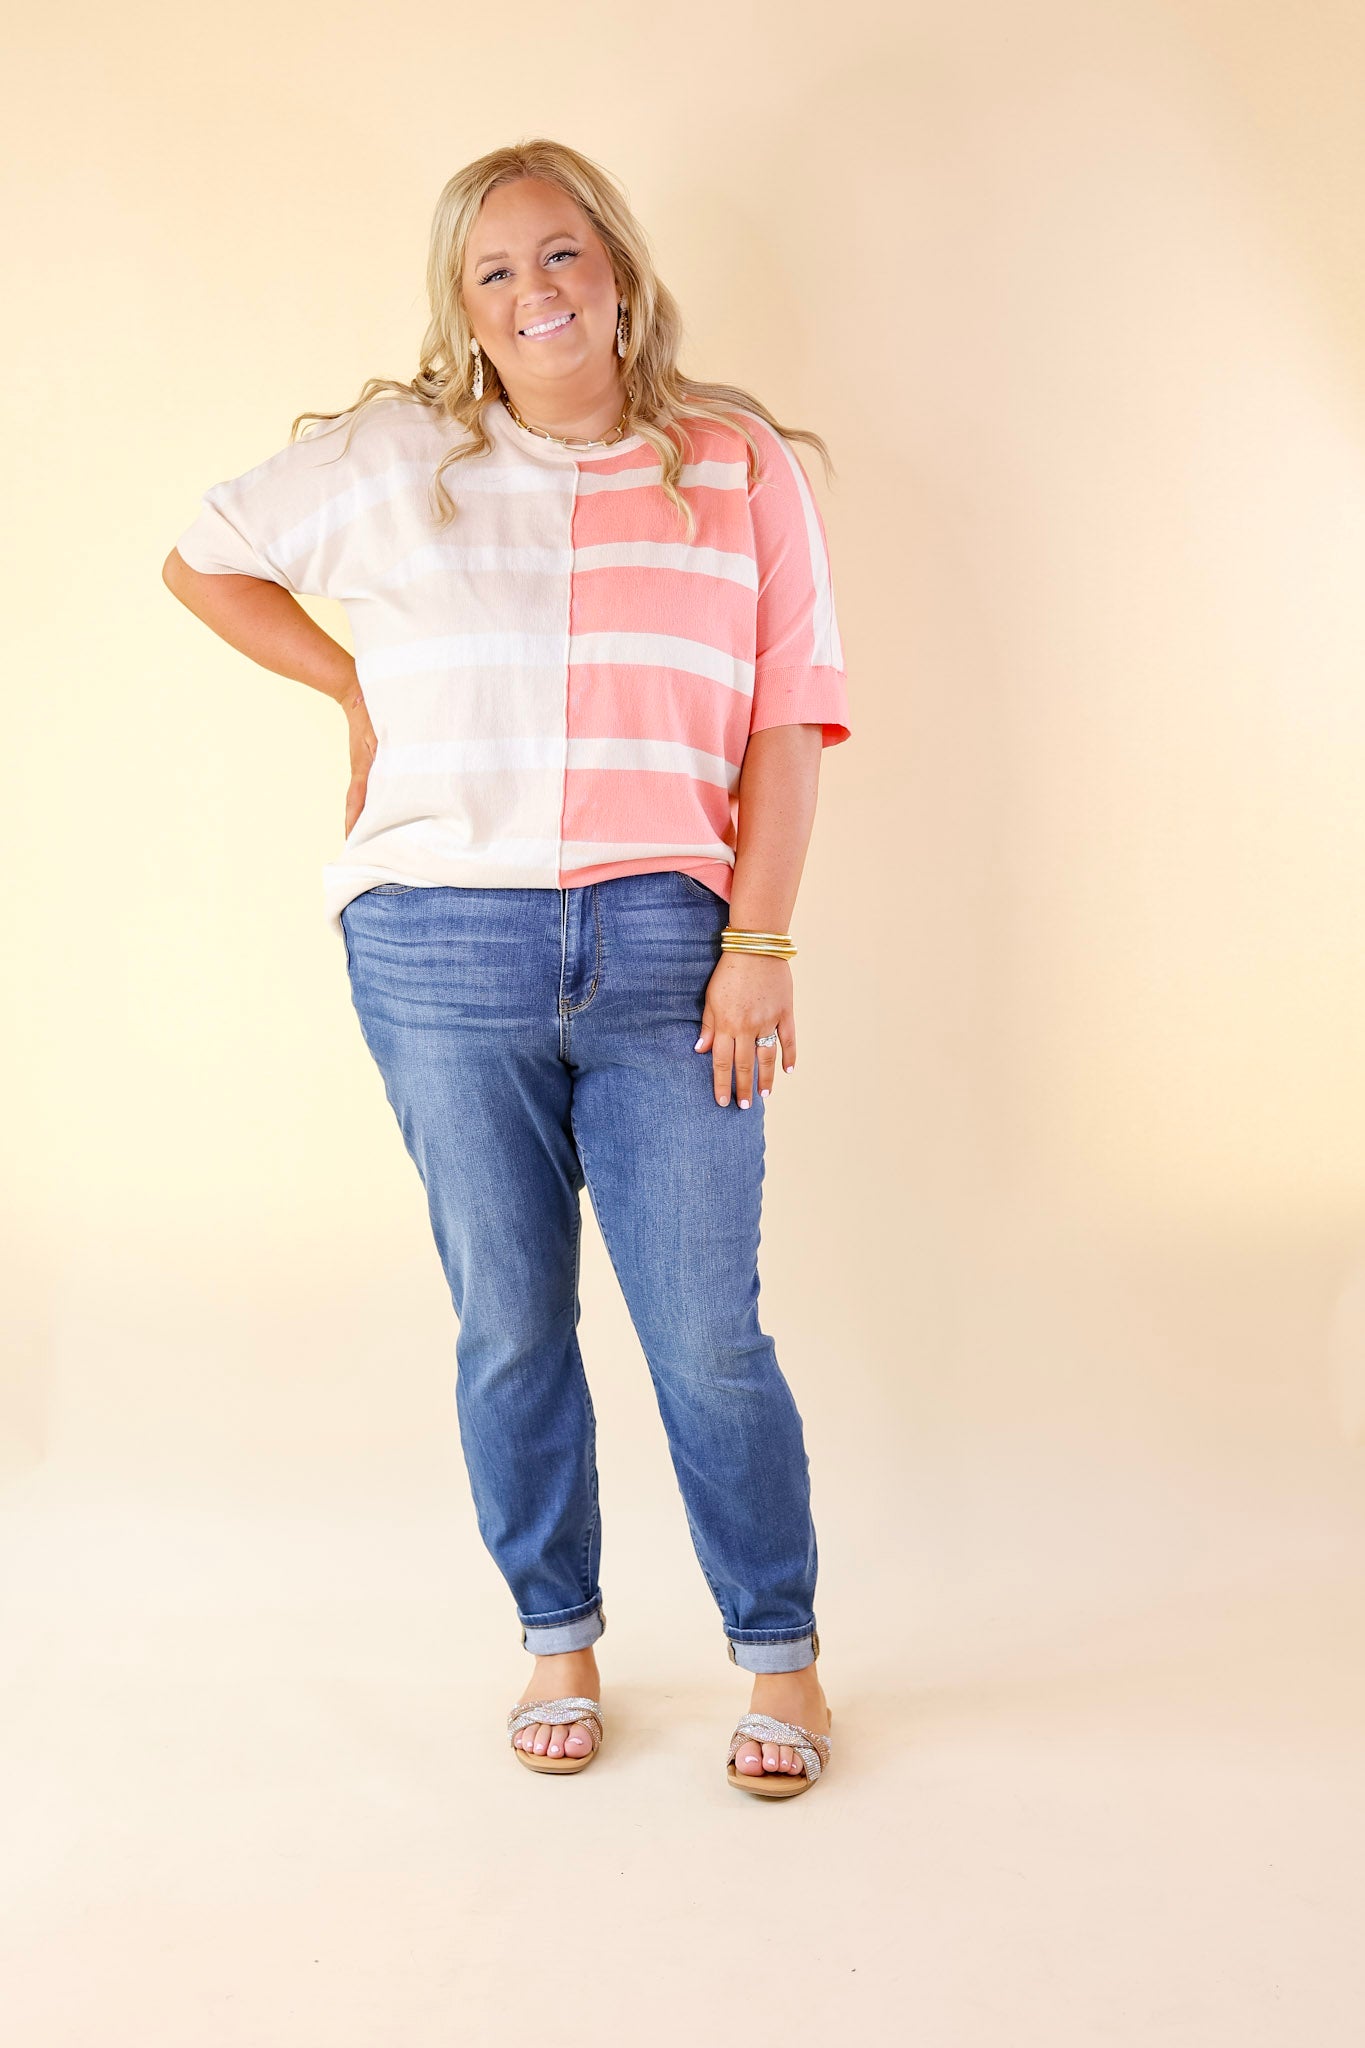 Urban Chic Color Block Striped Knit Top in Cream and Coral - Giddy Up Glamour Boutique